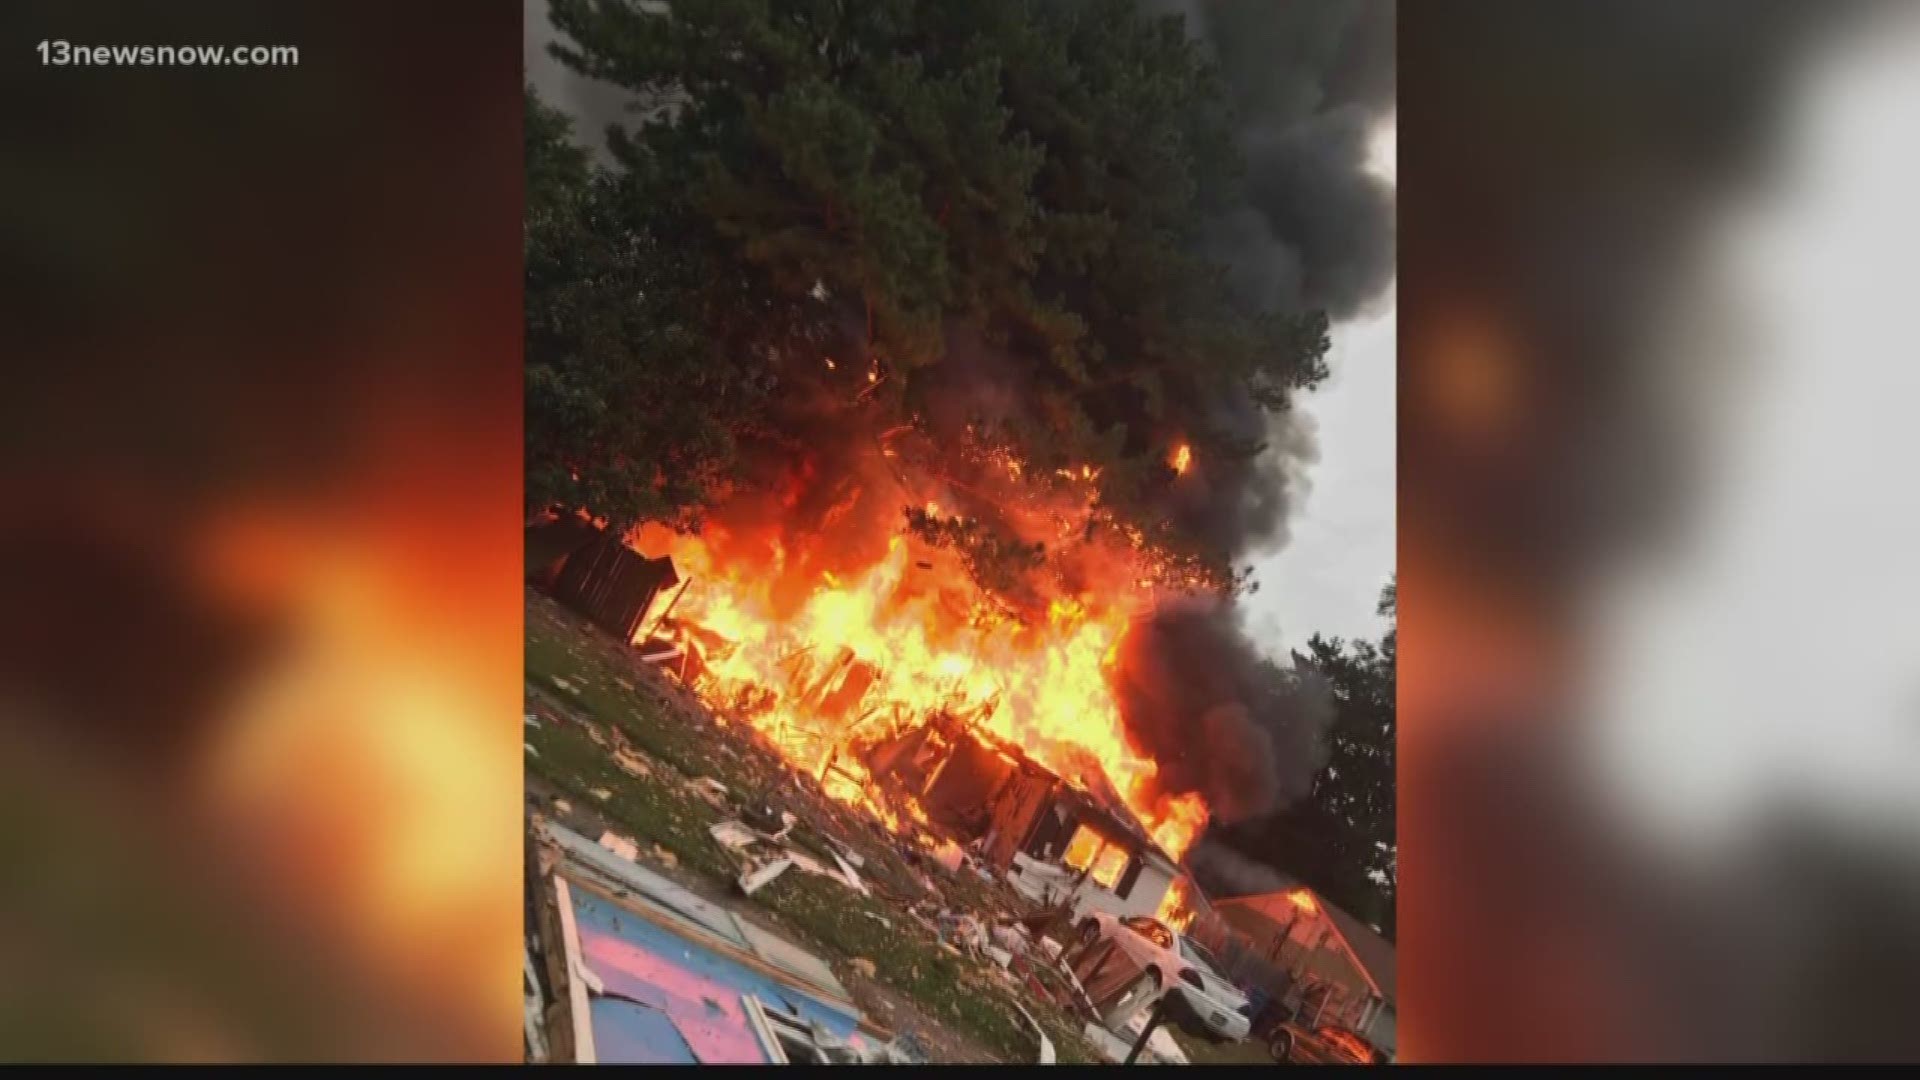 One person has died following an explosion in a house in Chesapeake